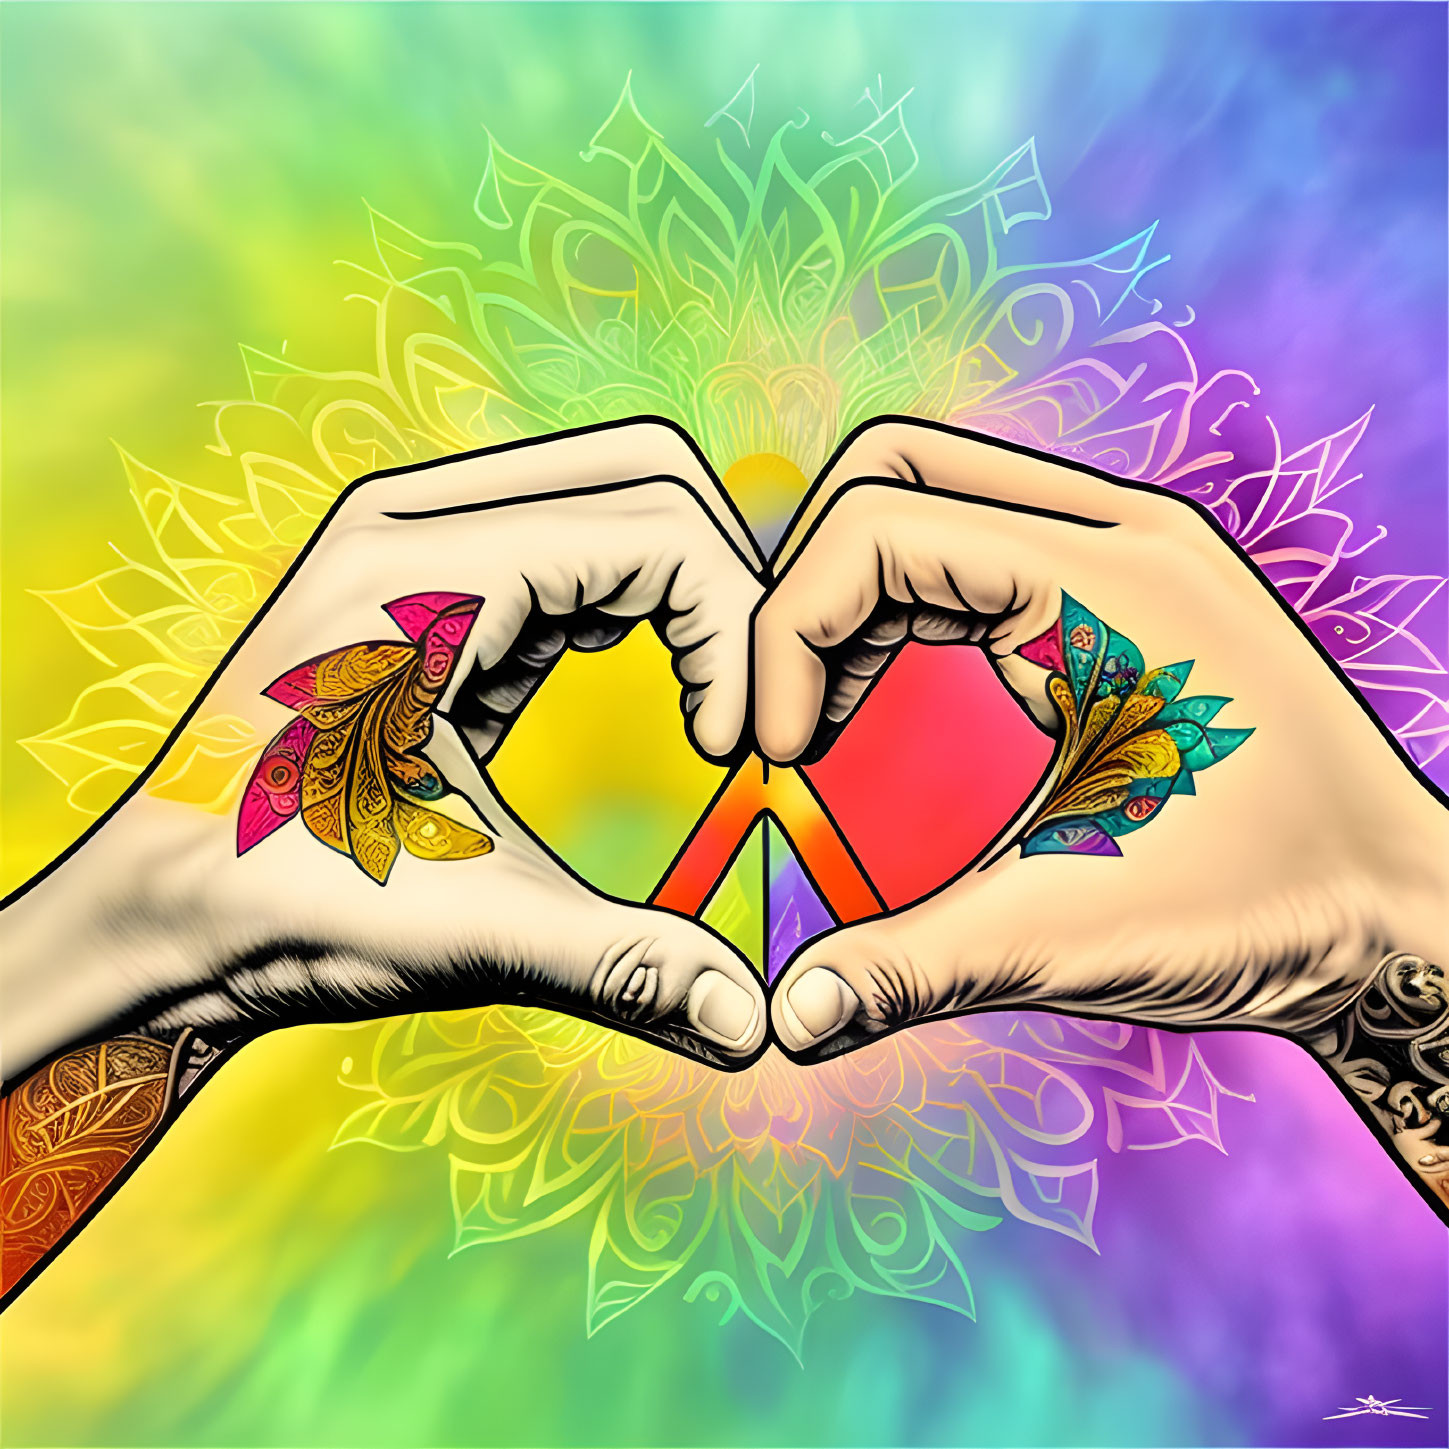 Heart hands, love and peace